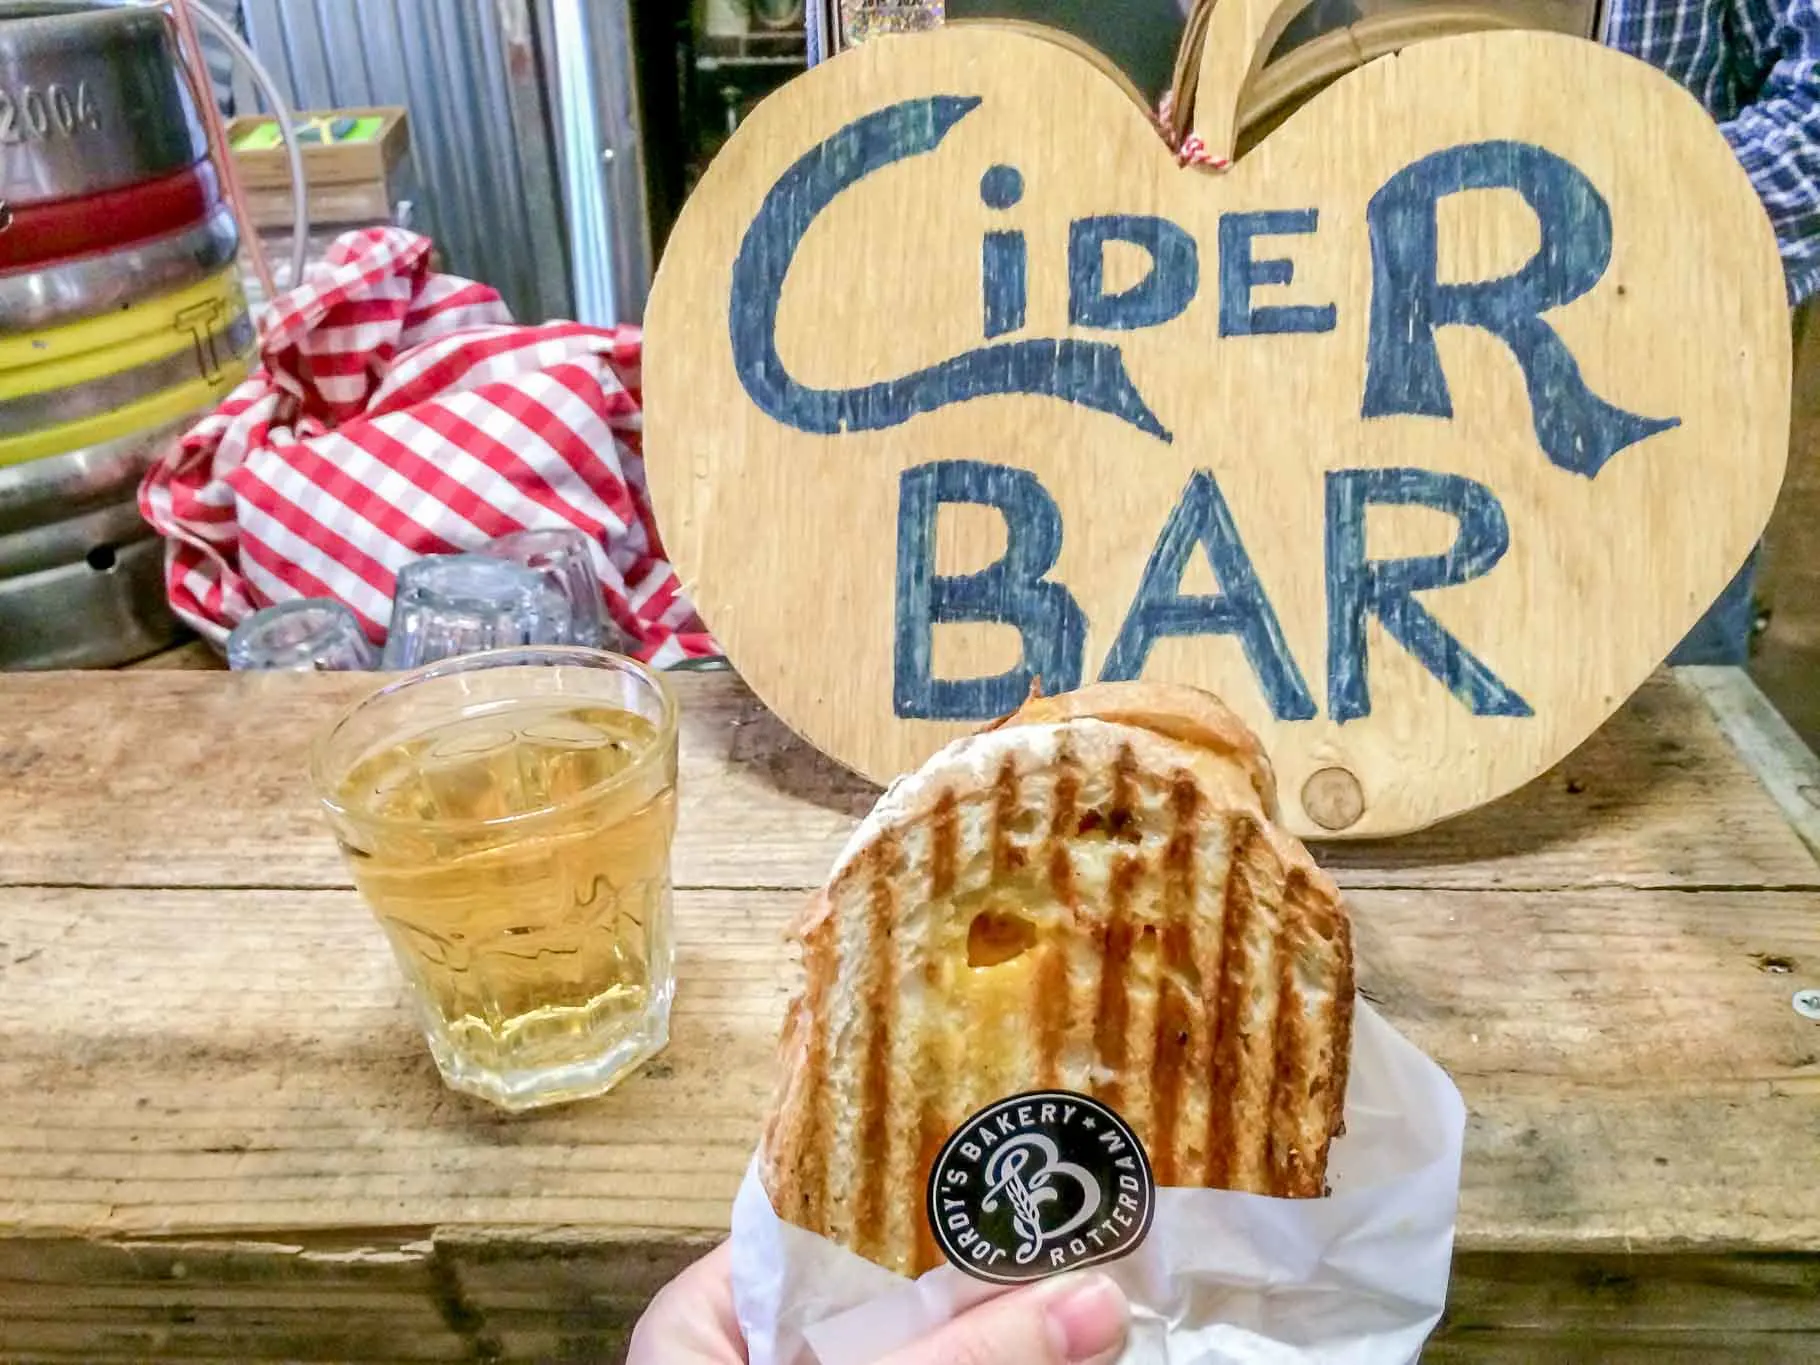 "Cider Bar" sign, sandwich, and drink on a table